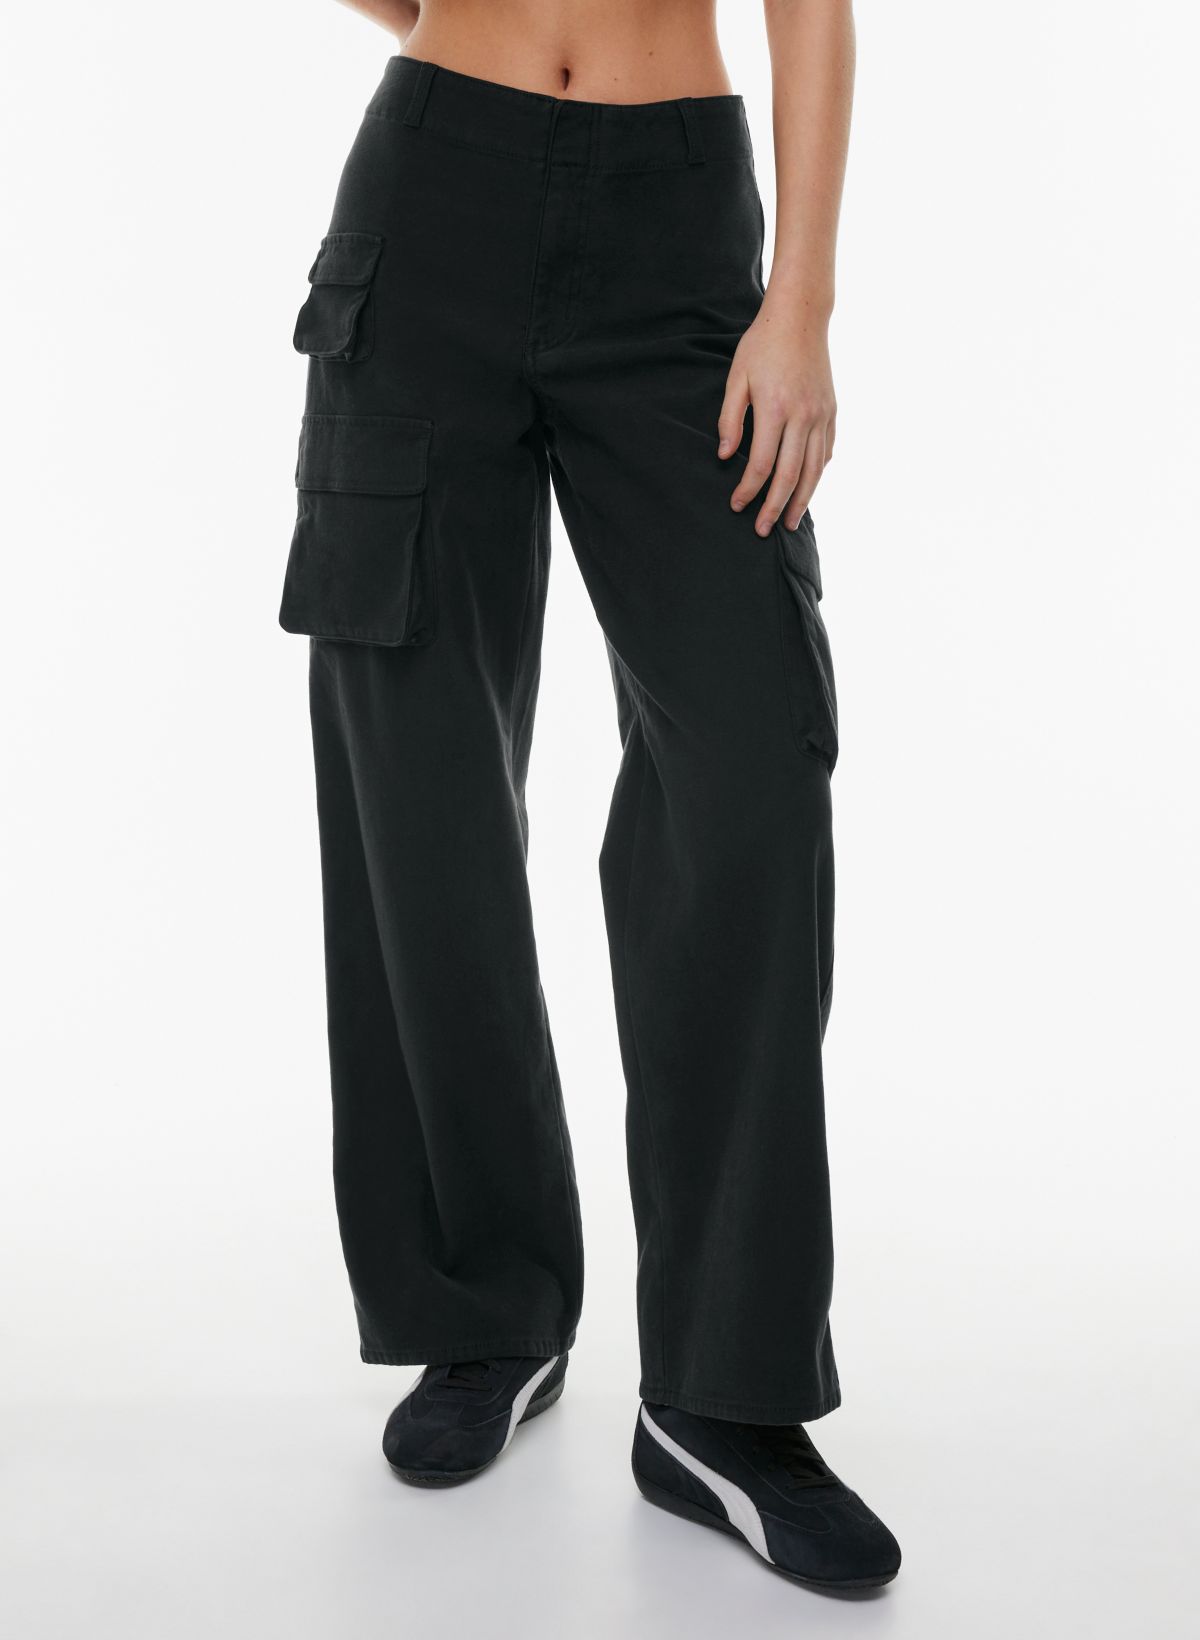 Tna PICTURE CARGO PANT